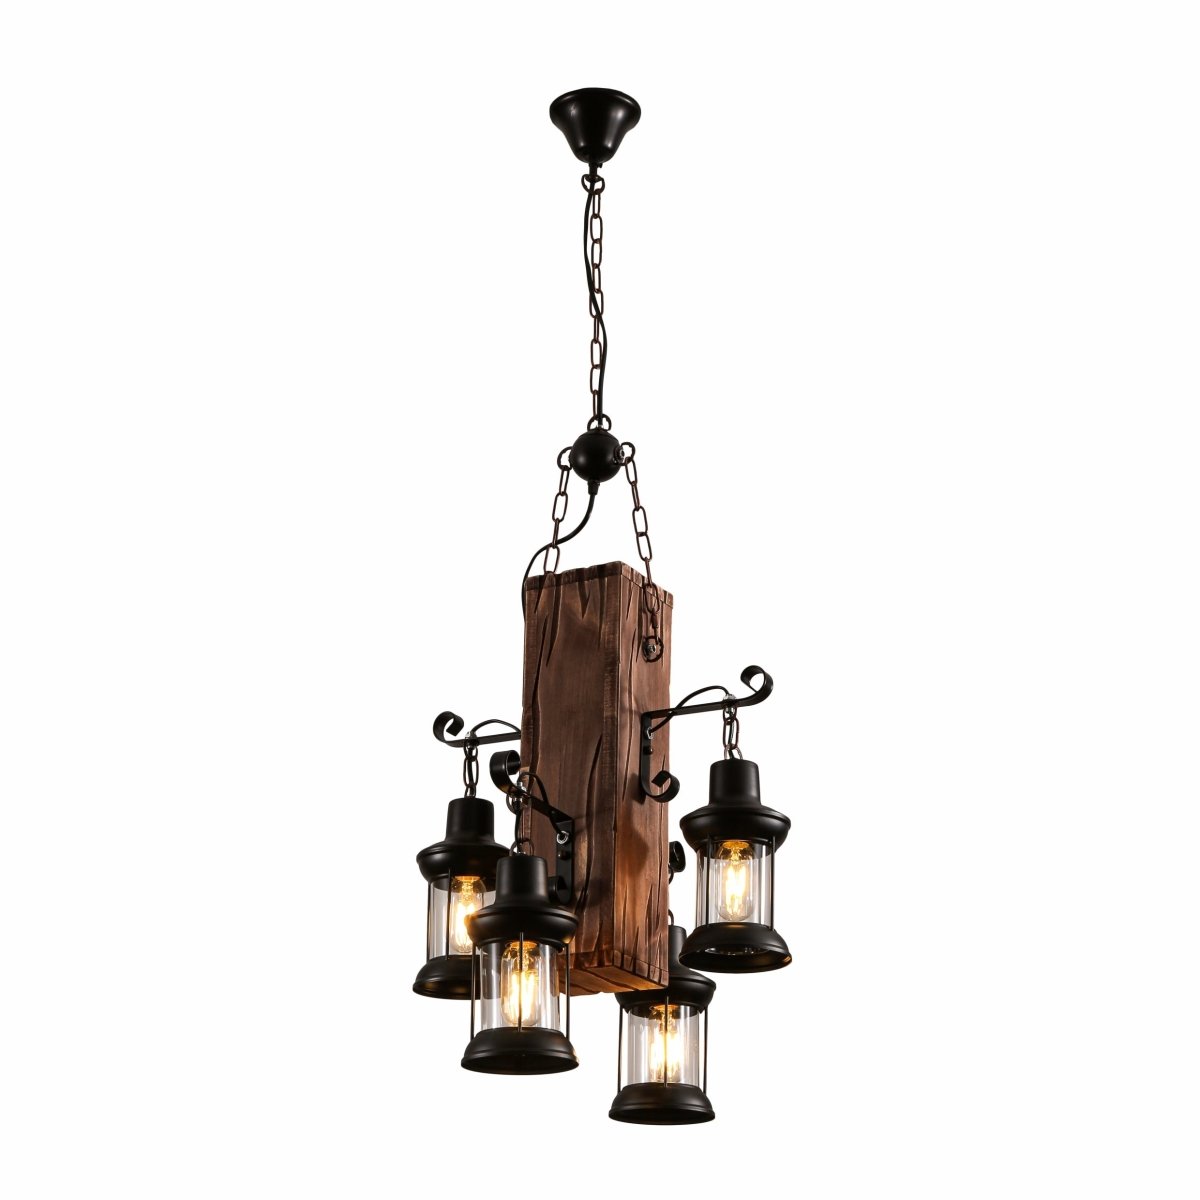 Main image of Timber Iron and Wood Glass Cylinder Chandelier Light 4xE27 | TEKLED 159-17844